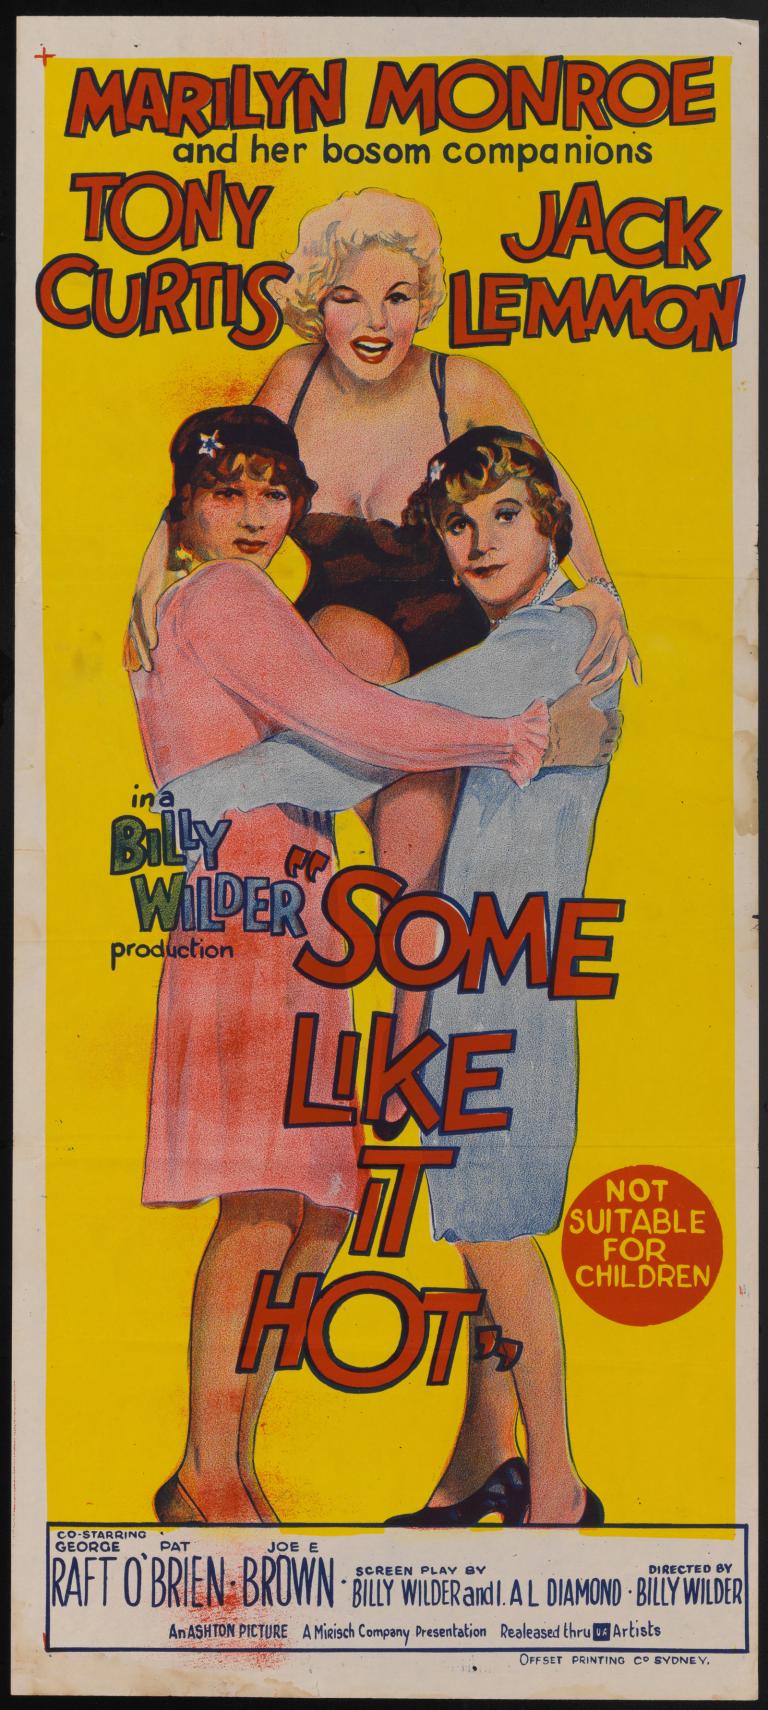 Movie poster for the film Some Like it Hot